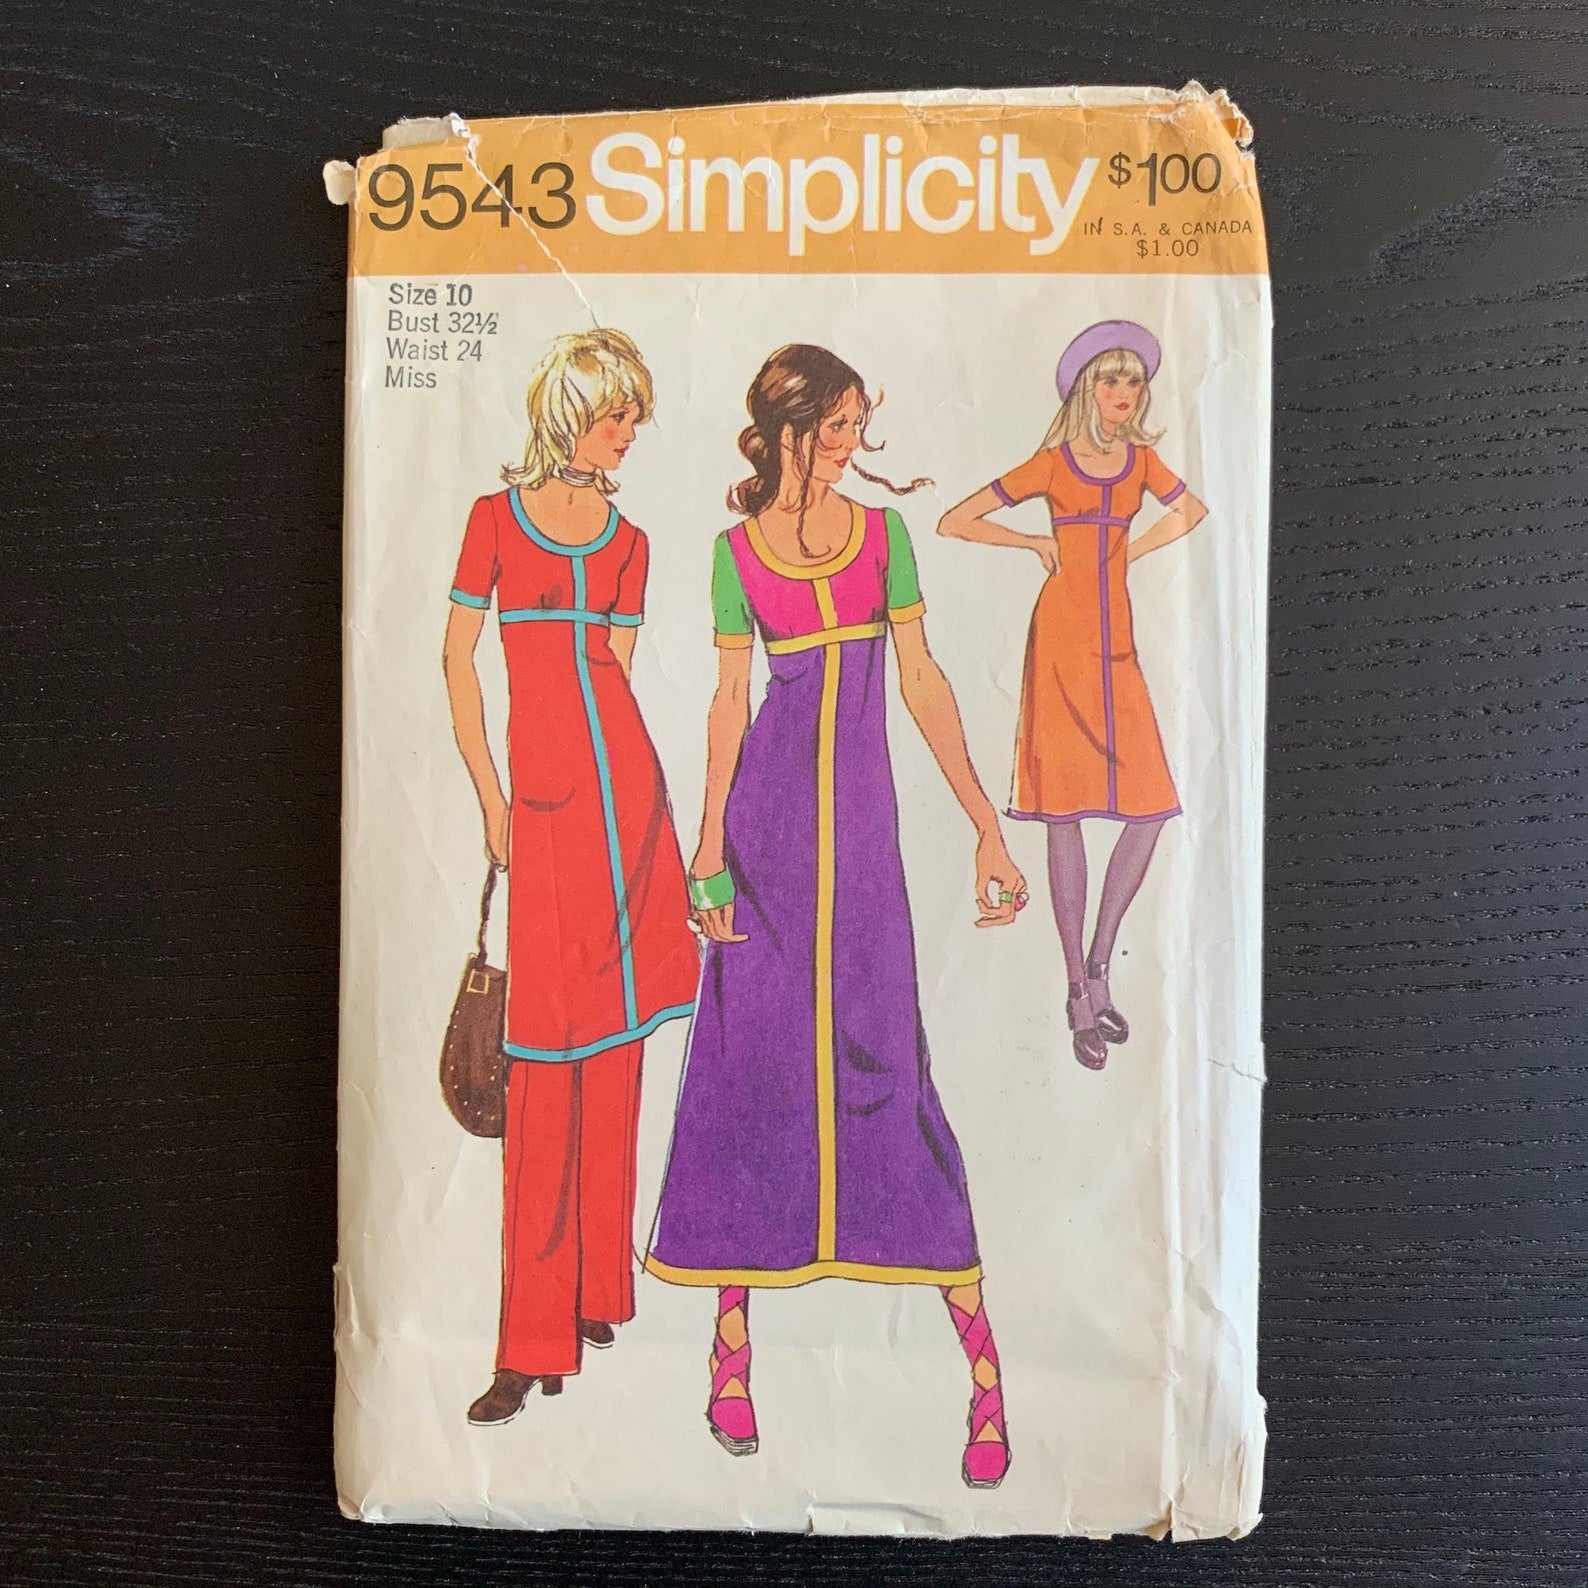 Vintage 1970s Simplicity Sewing Pattern 9543, Women's Tunic Dress & Pants, Bust 32.5", Incomplete